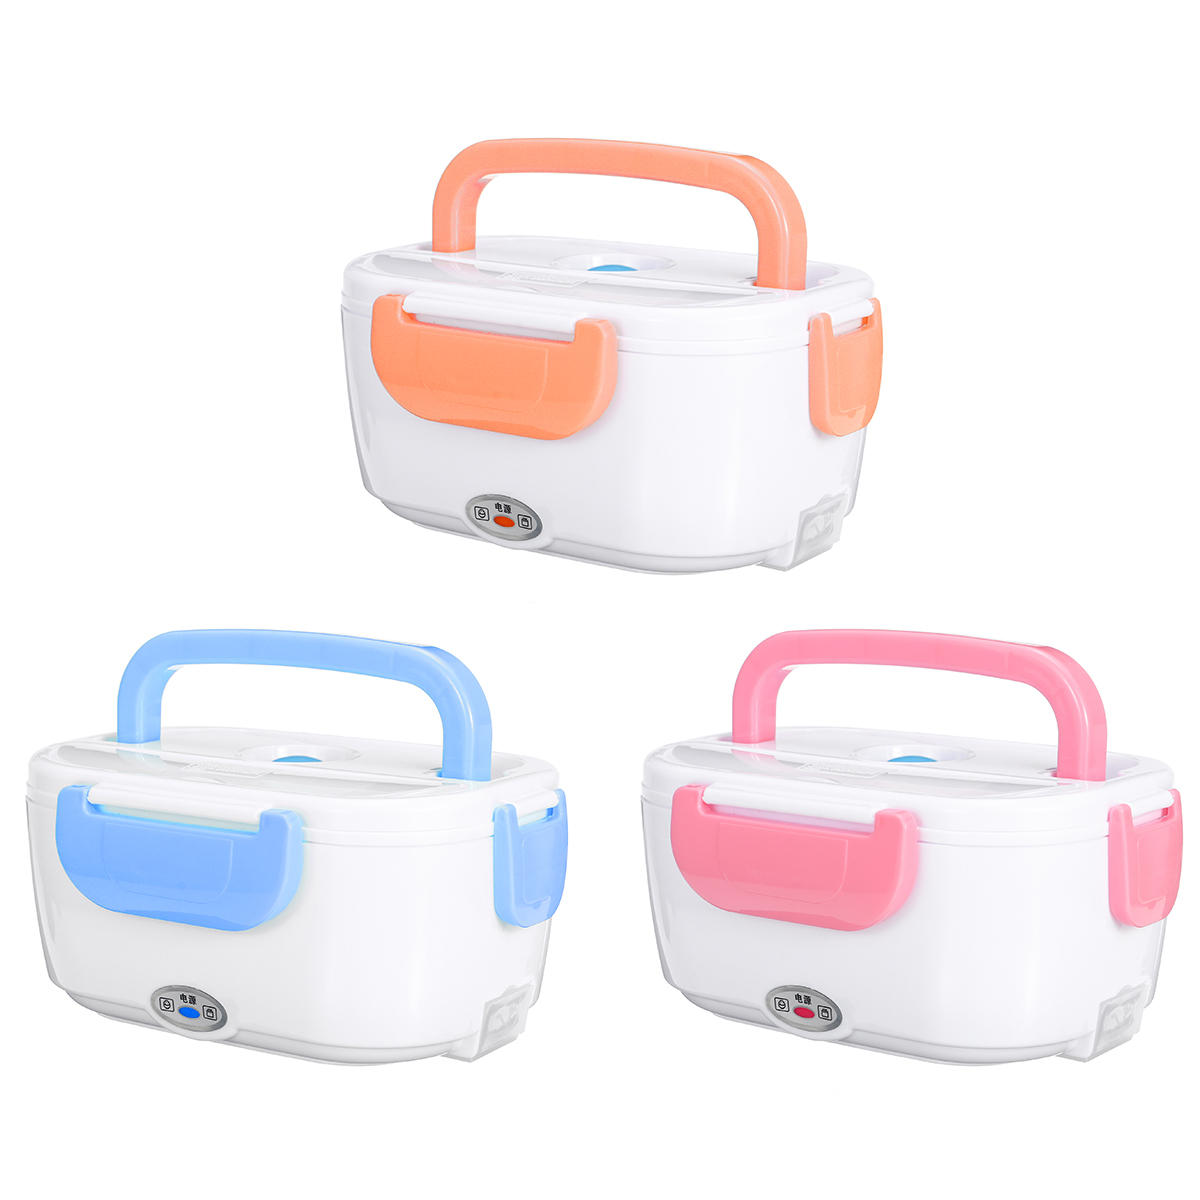 40W 1.05L Electric Lunch Box Portable Heated Bento Food Warmer Storage Container